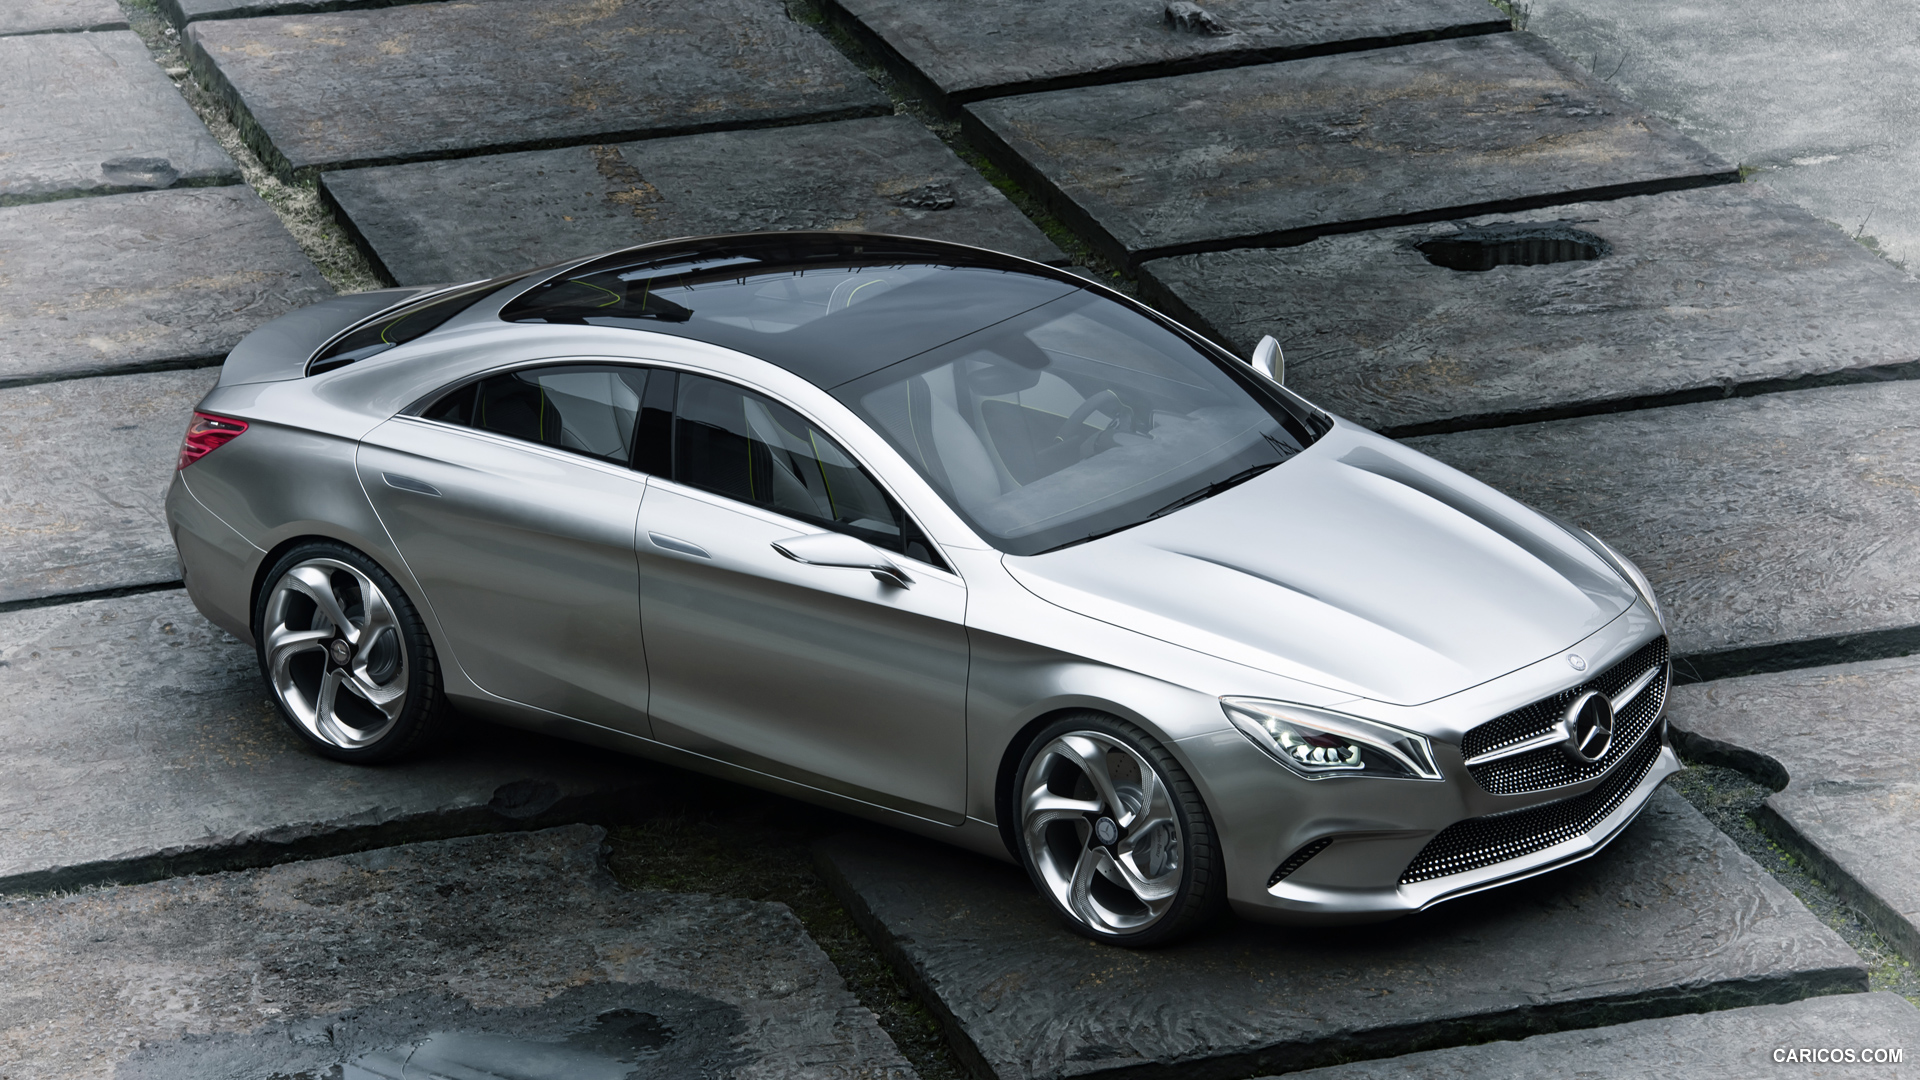 Mercedes-Benz Concept Style Coupe (2012)  - Top, #12 of 35